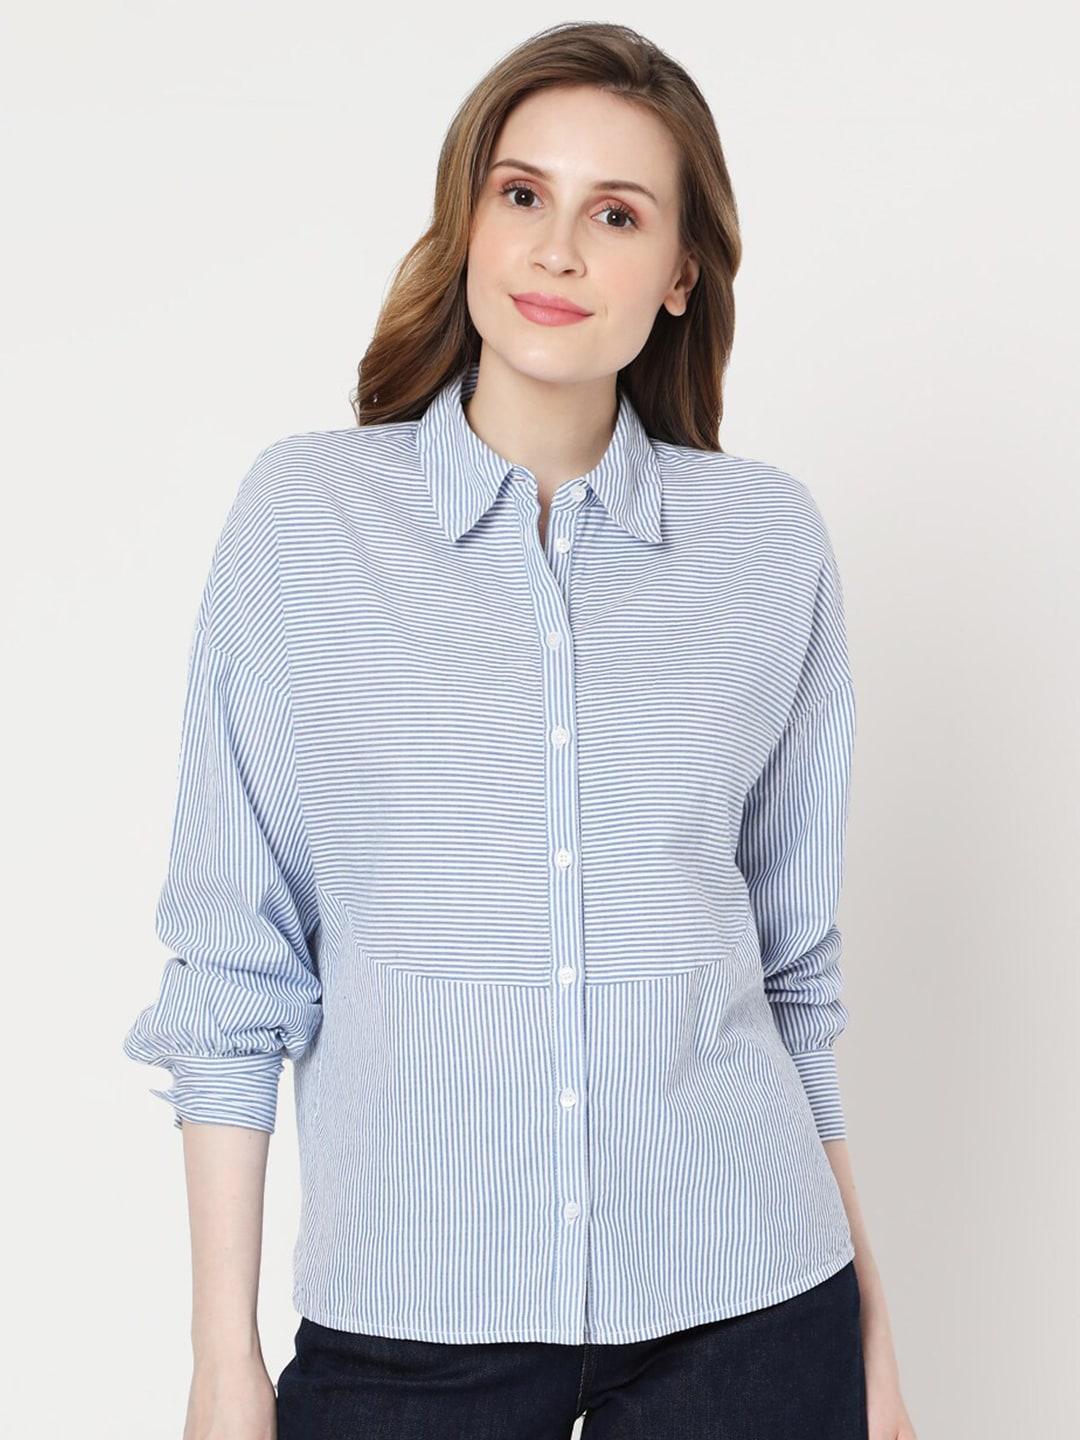 Vero Moda Blue Striped Extended Sleeves Shirt Style Top